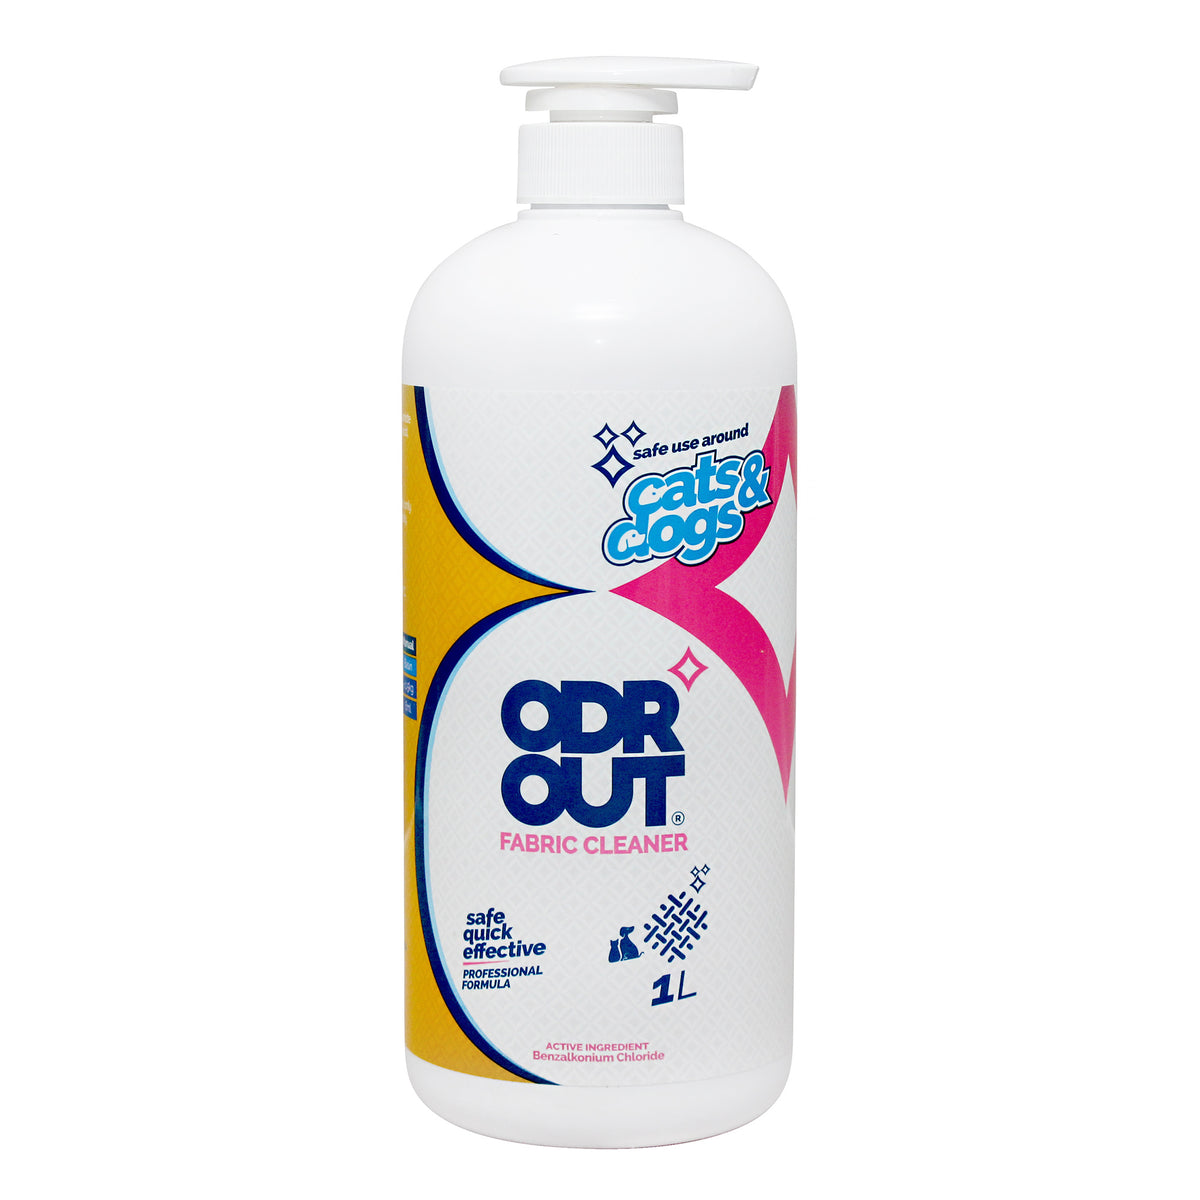 ODR OUT Fabric Cleaner